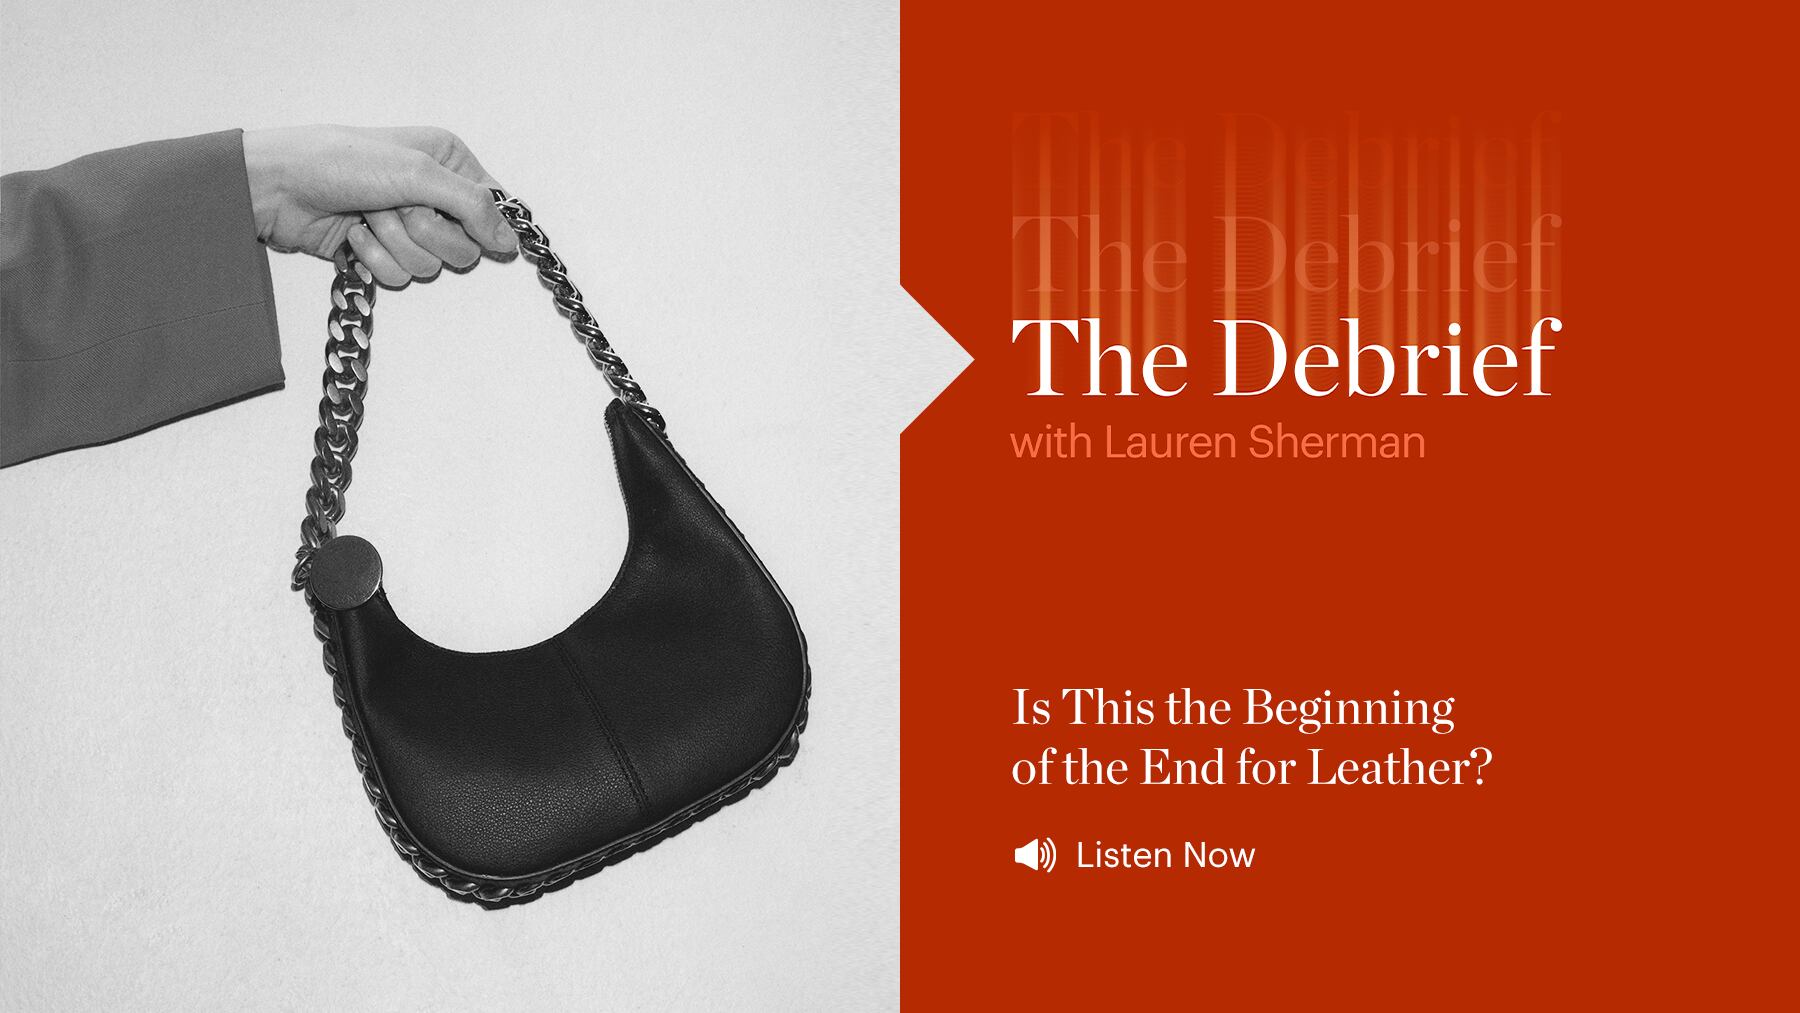 Is This the Beginning of the End for Leather?